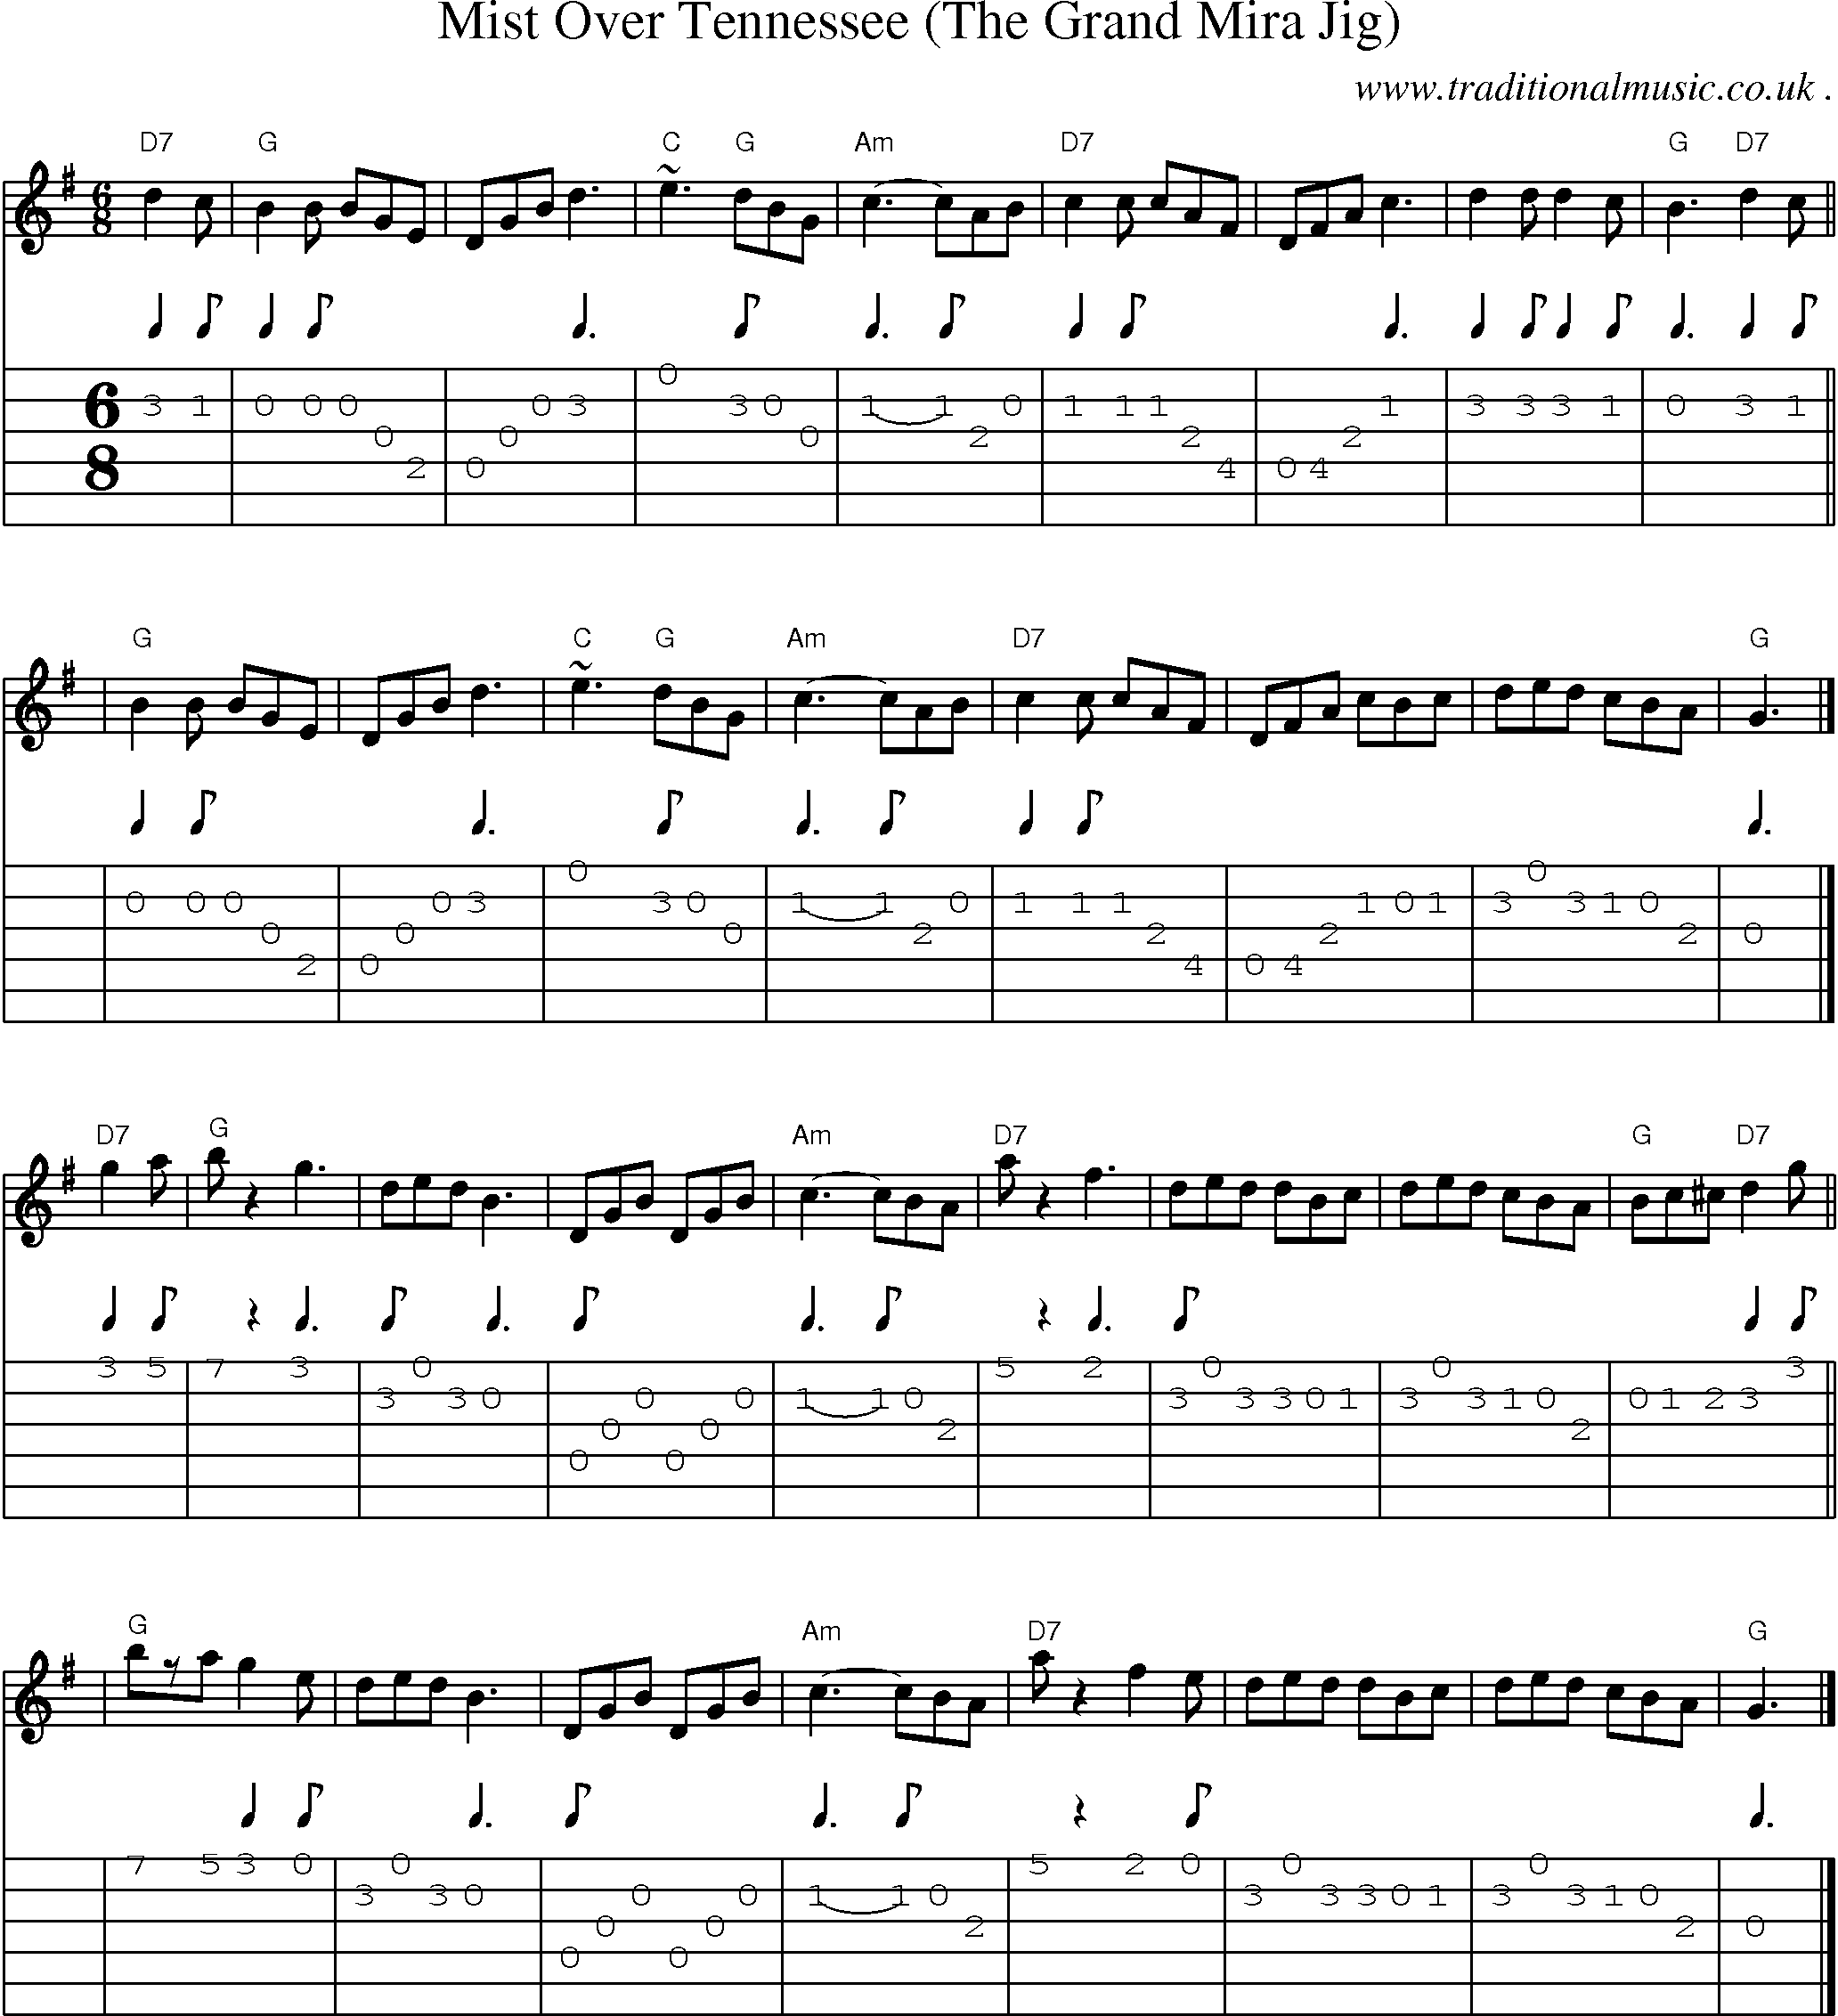 Sheet-music  score, Chords and Guitar Tabs for Mist Over Tennessee The Grand Mira Jig